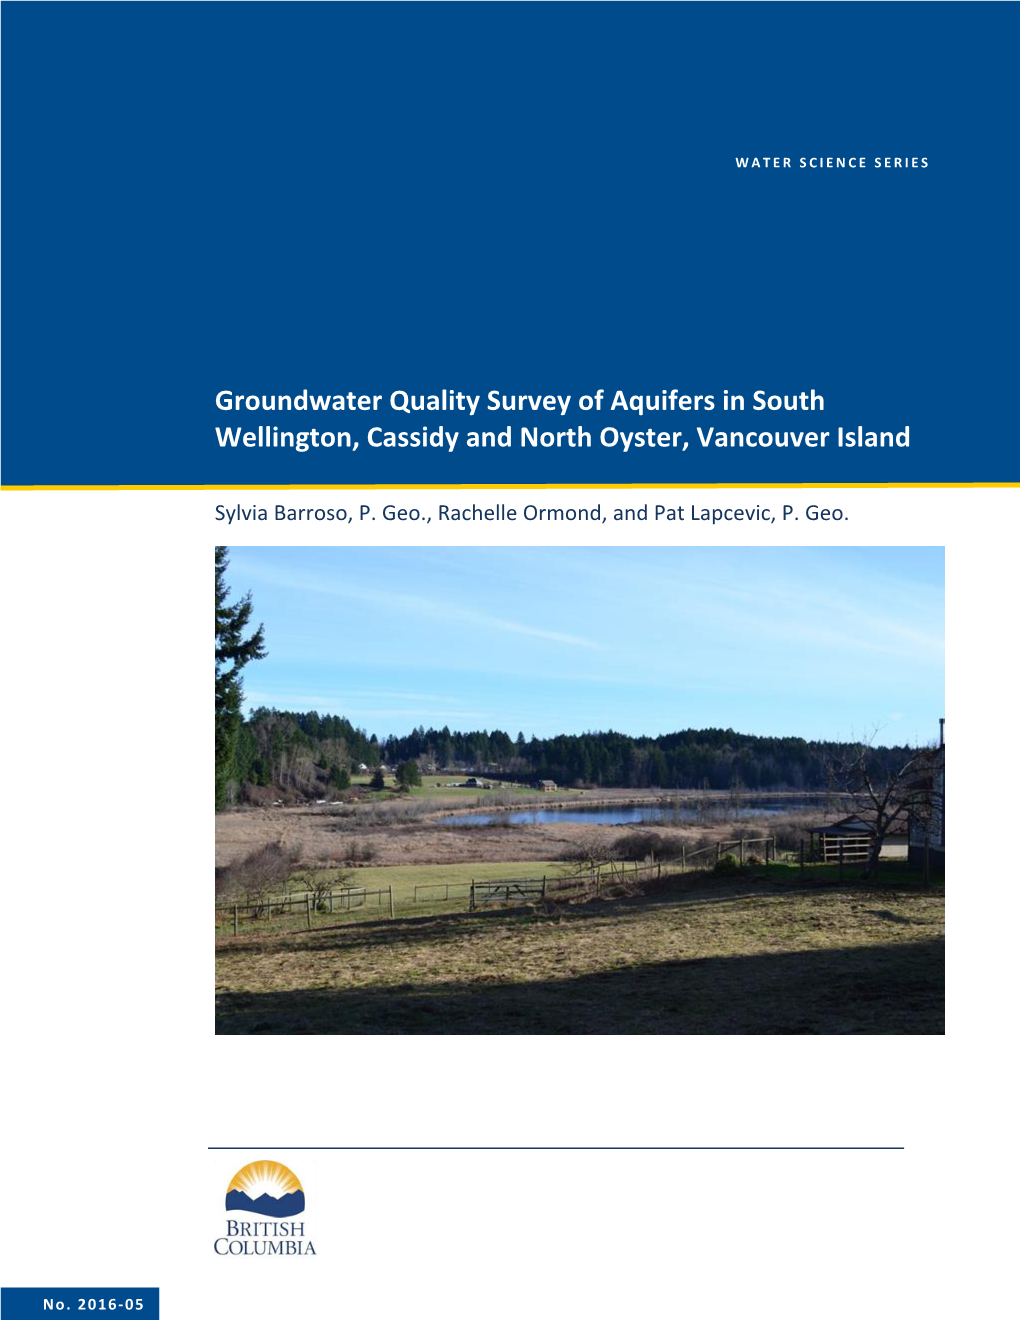 Groundwater Quality Survey of Aquifers in South Wellington, Cassidy and North Oyster, Vancouver Island